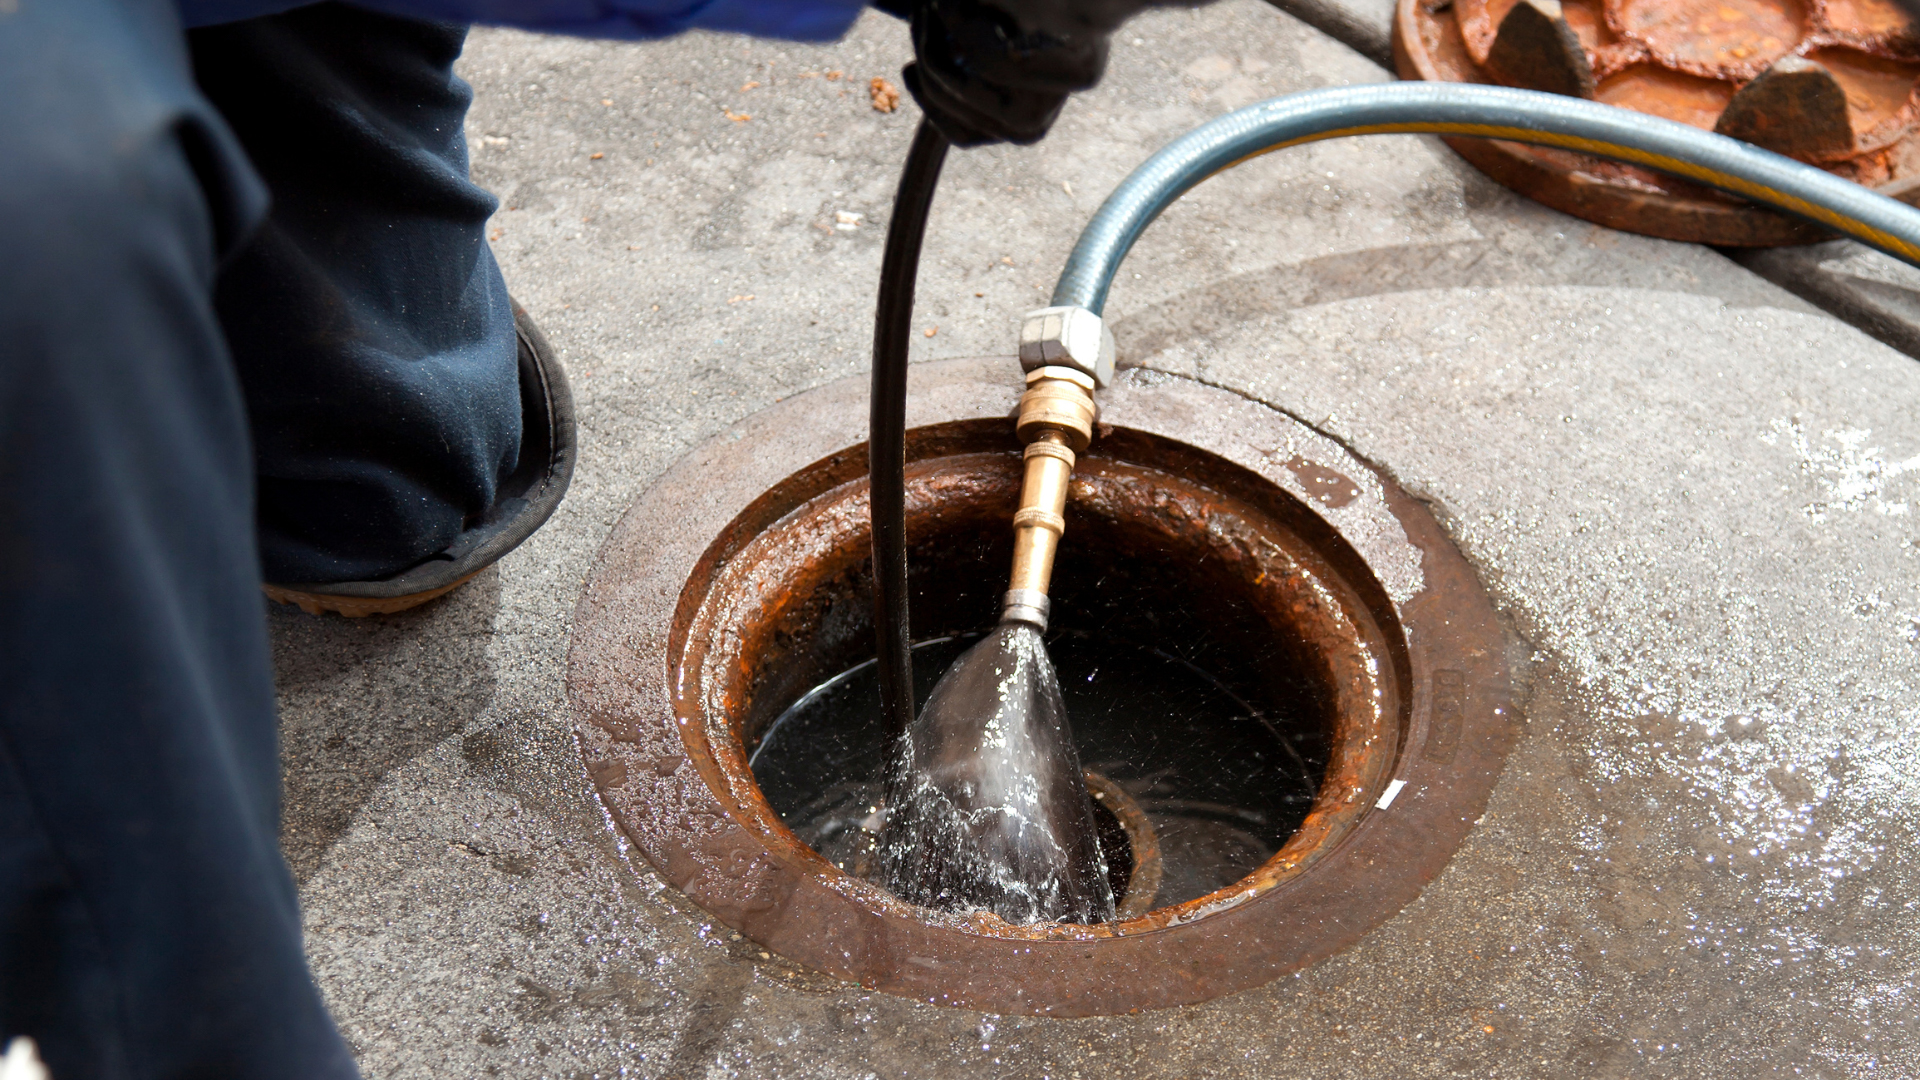 Sewer Repair & Replacement in Charleston, SC from Fix-it 24/7 Air Conditioning, Plumbing & Heating